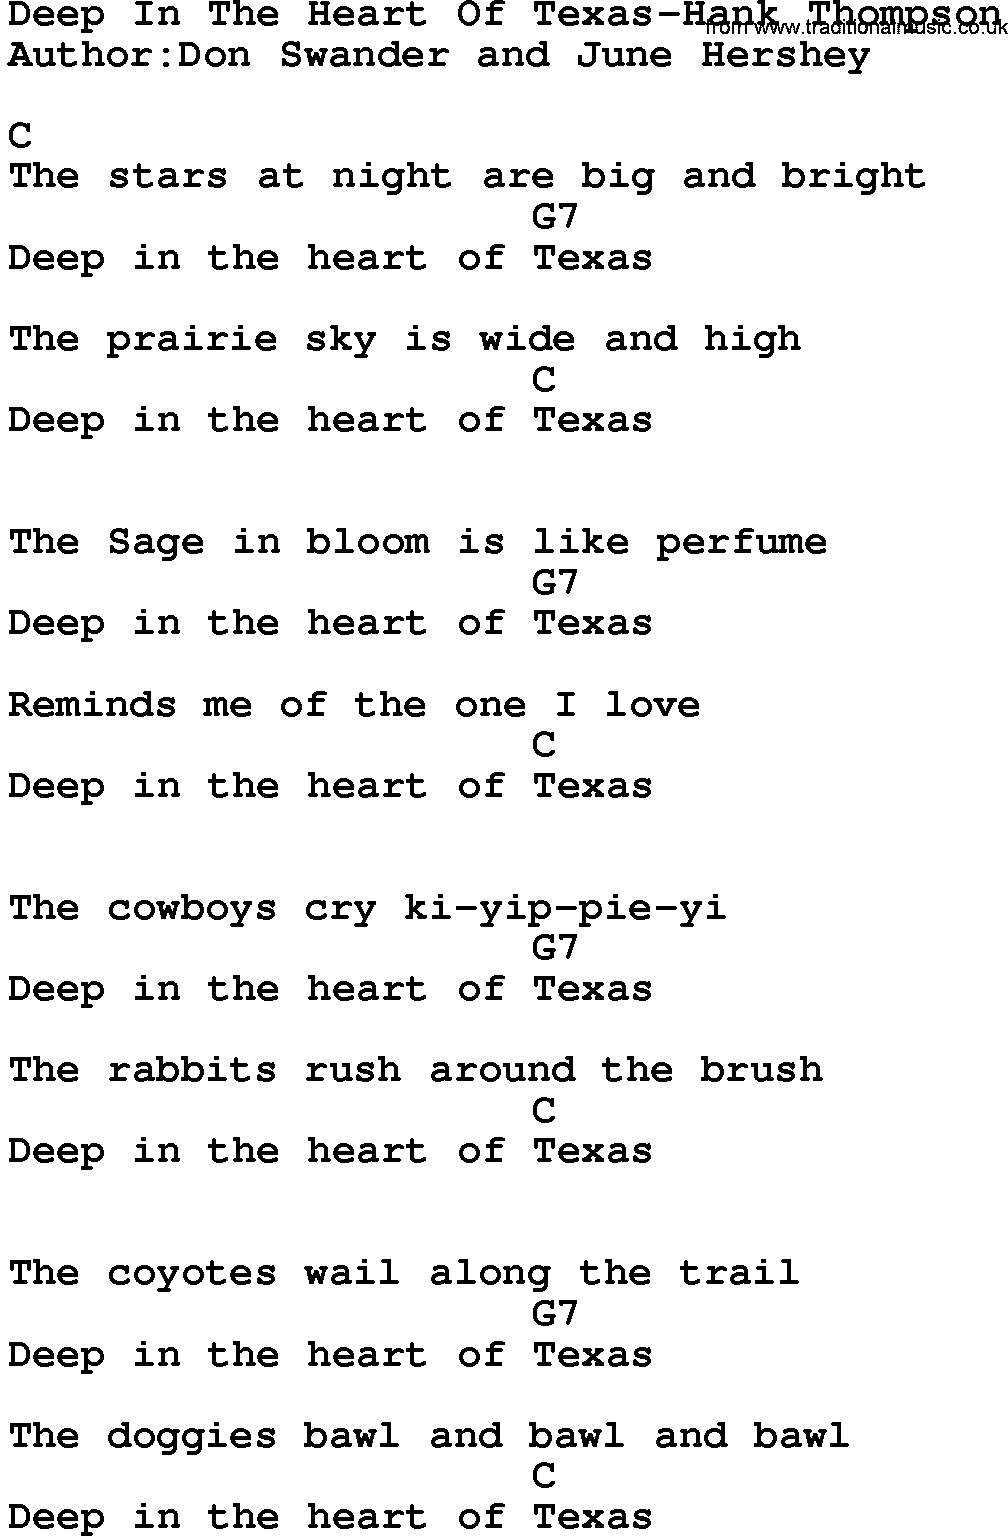 Country music song: Deep In The Heart Of Texas-Hank Thompson lyrics and chords